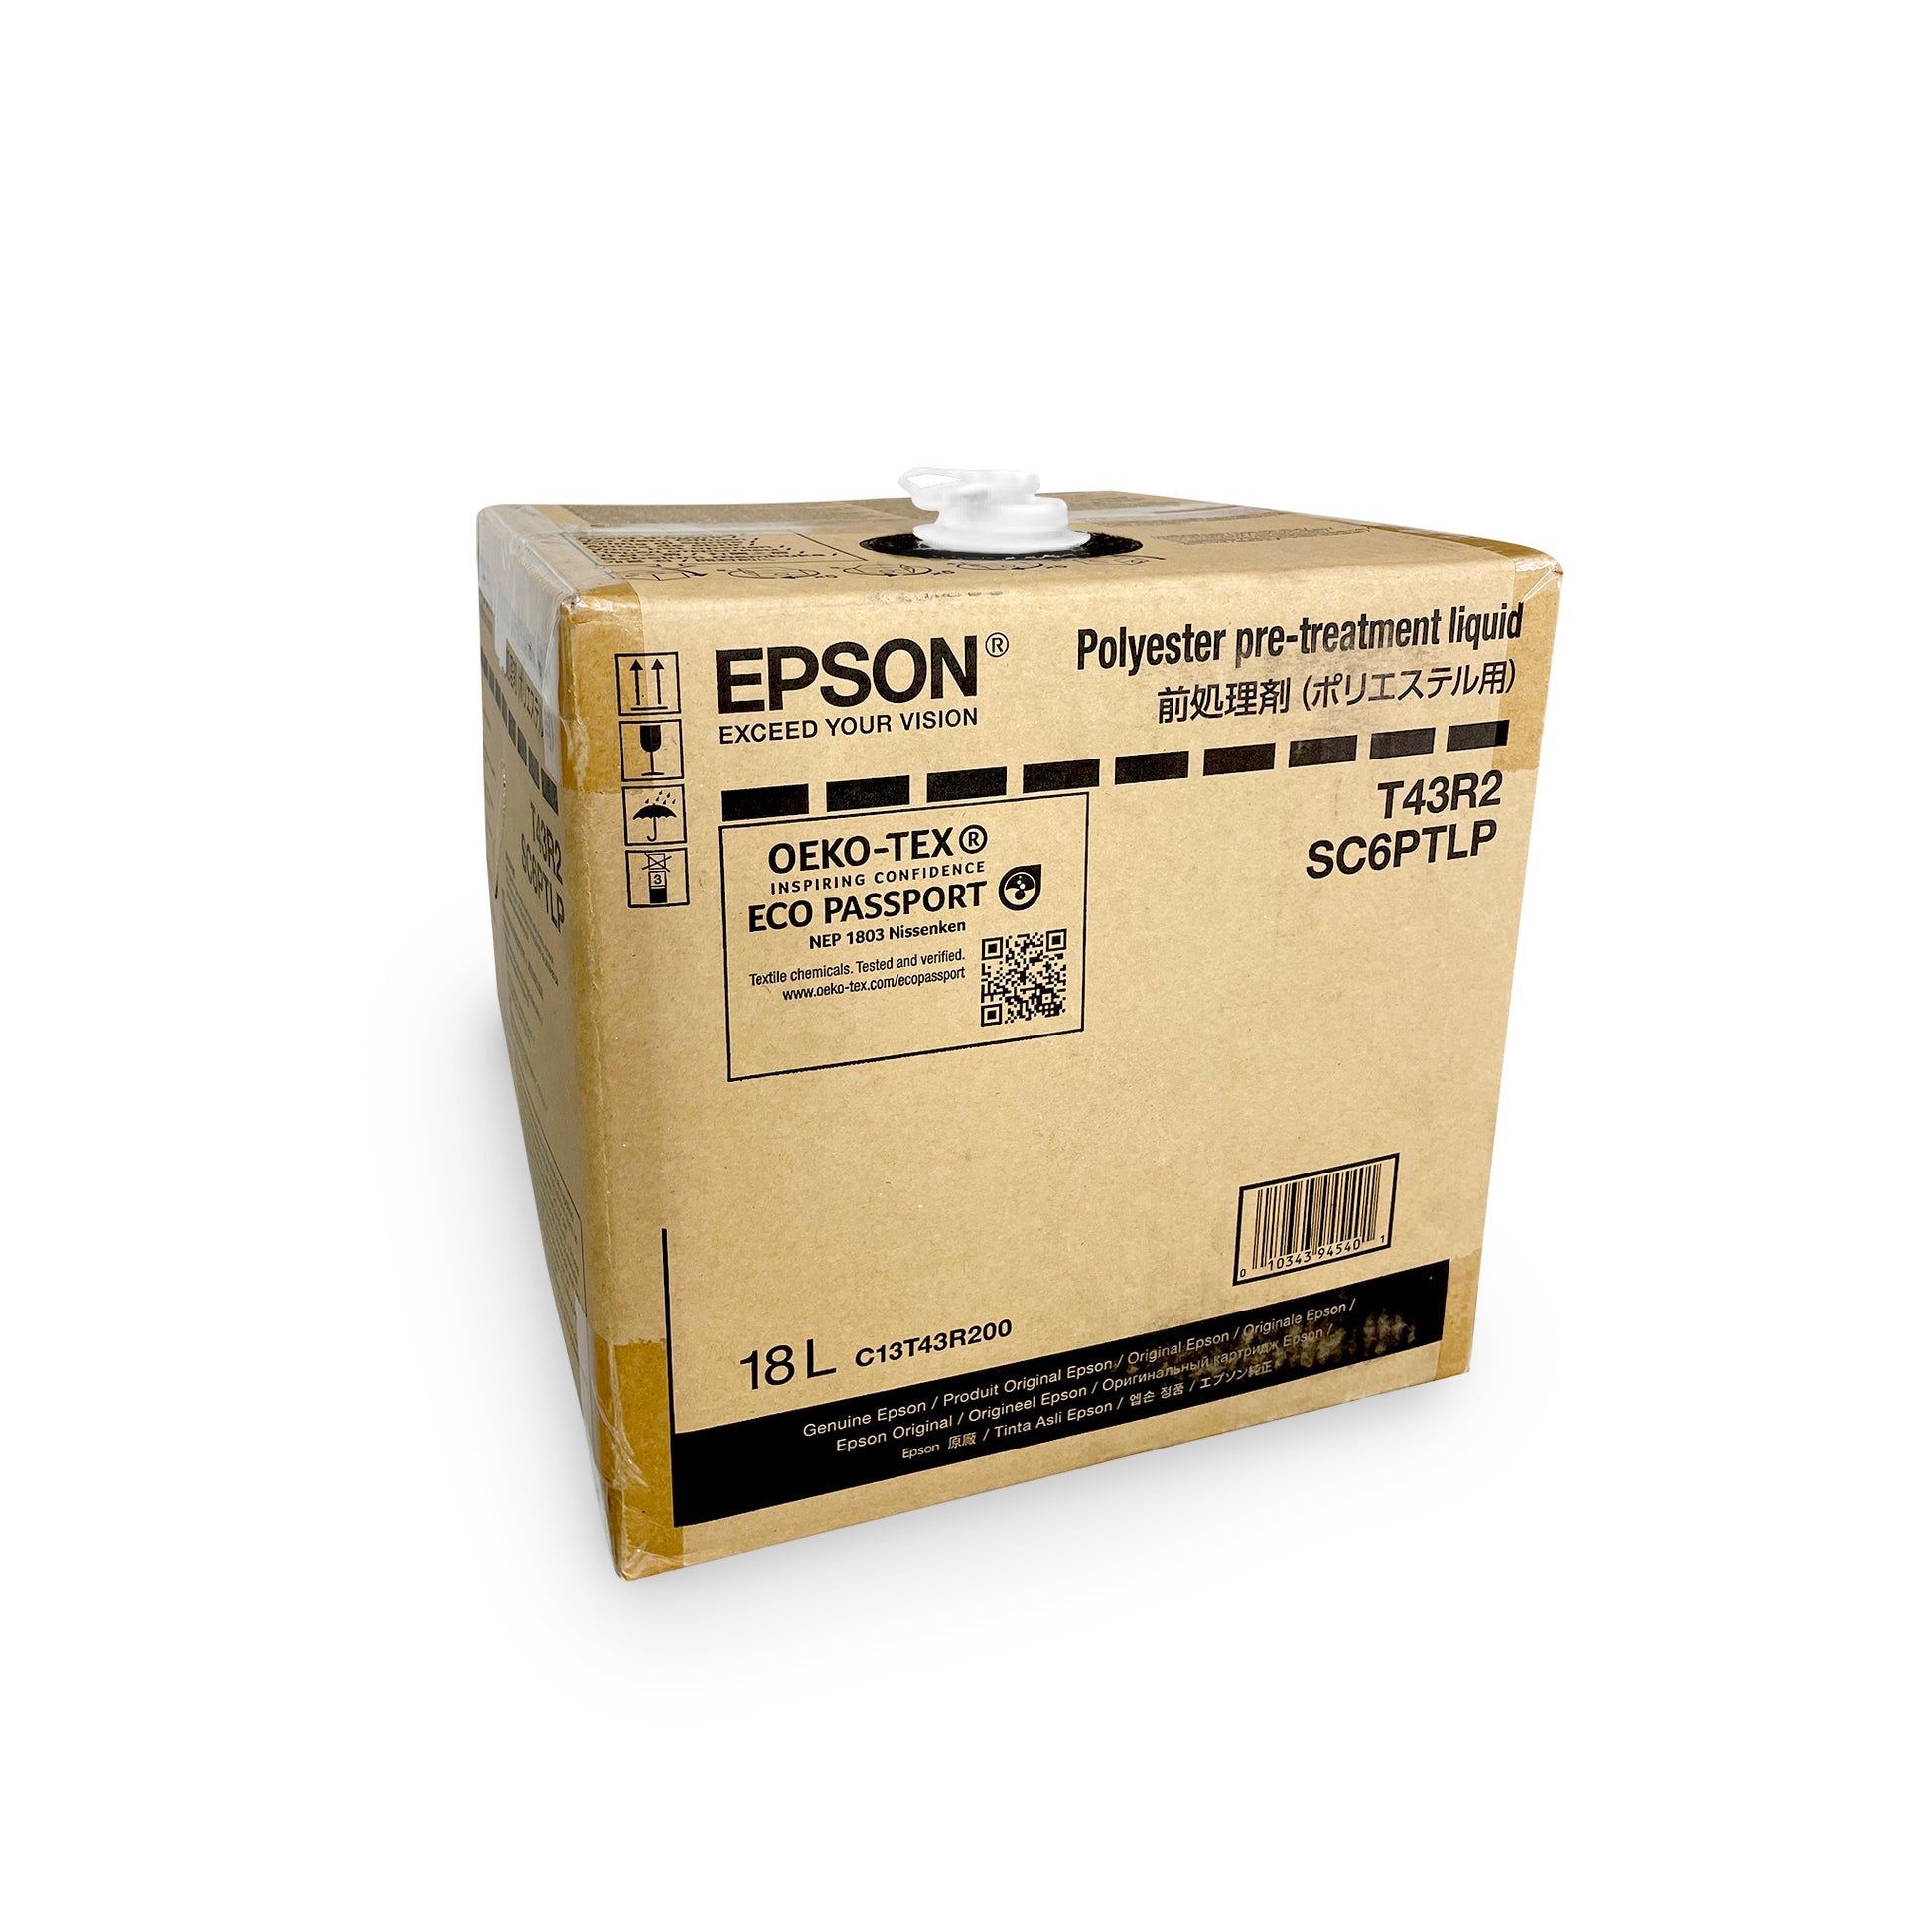 Epson Polyester DTG Pretreatment Solution-DTG Pre-Treat Solution-Epson Lawson Screen & Digital Products dtf printer screen printing direct to fabric equipment machine printers equipment dtg printer screen printing direct to garment equipment machine printers